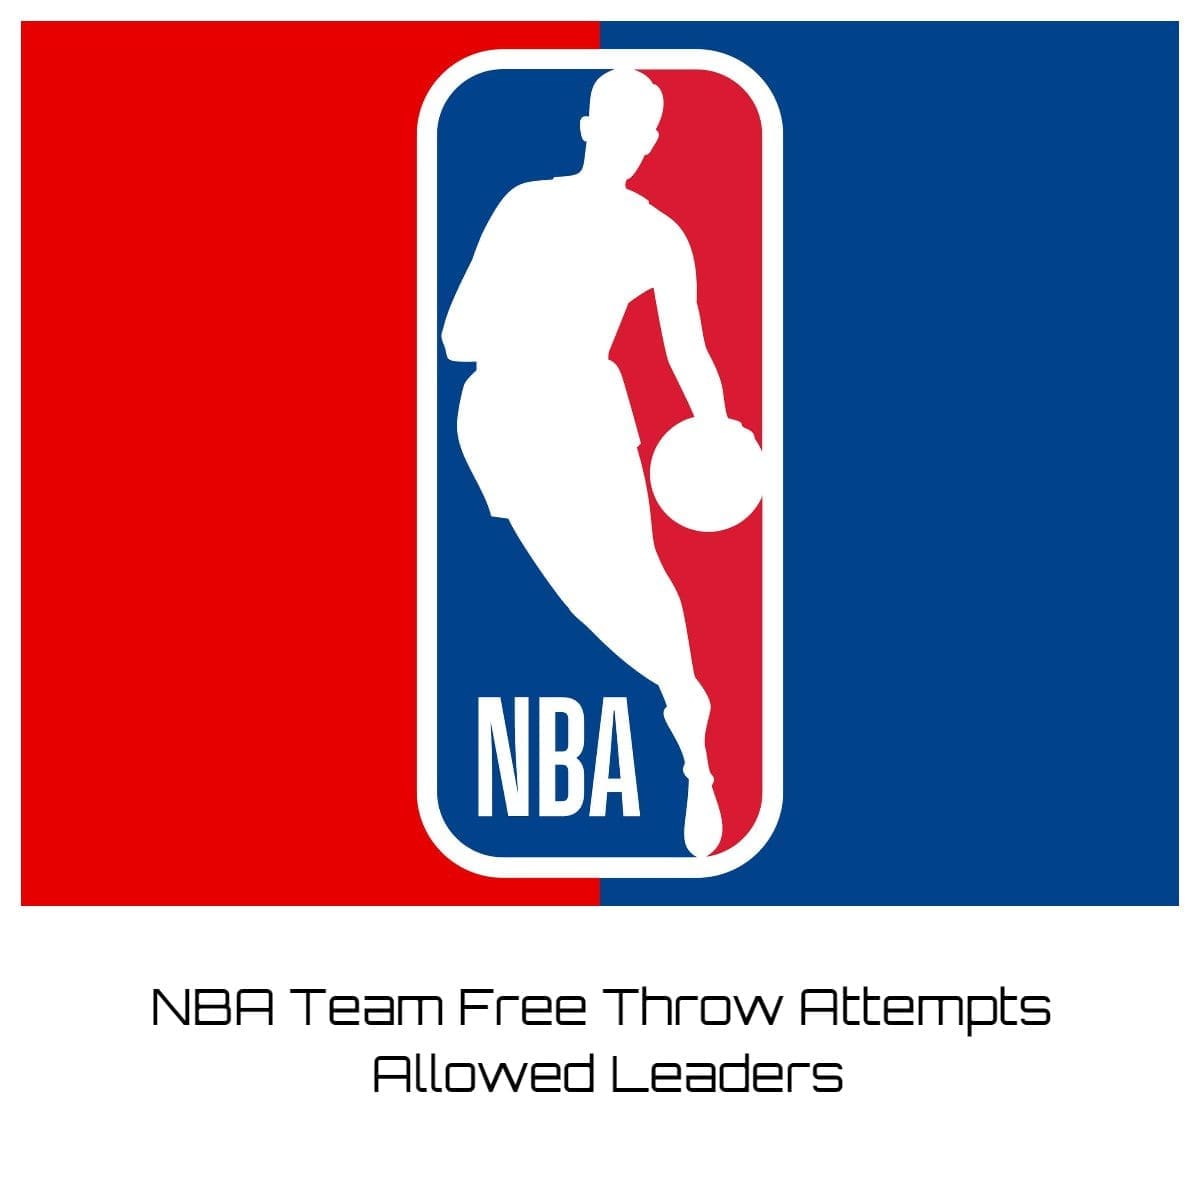 NBA Team Free Throw Attempts Allowed Leaders